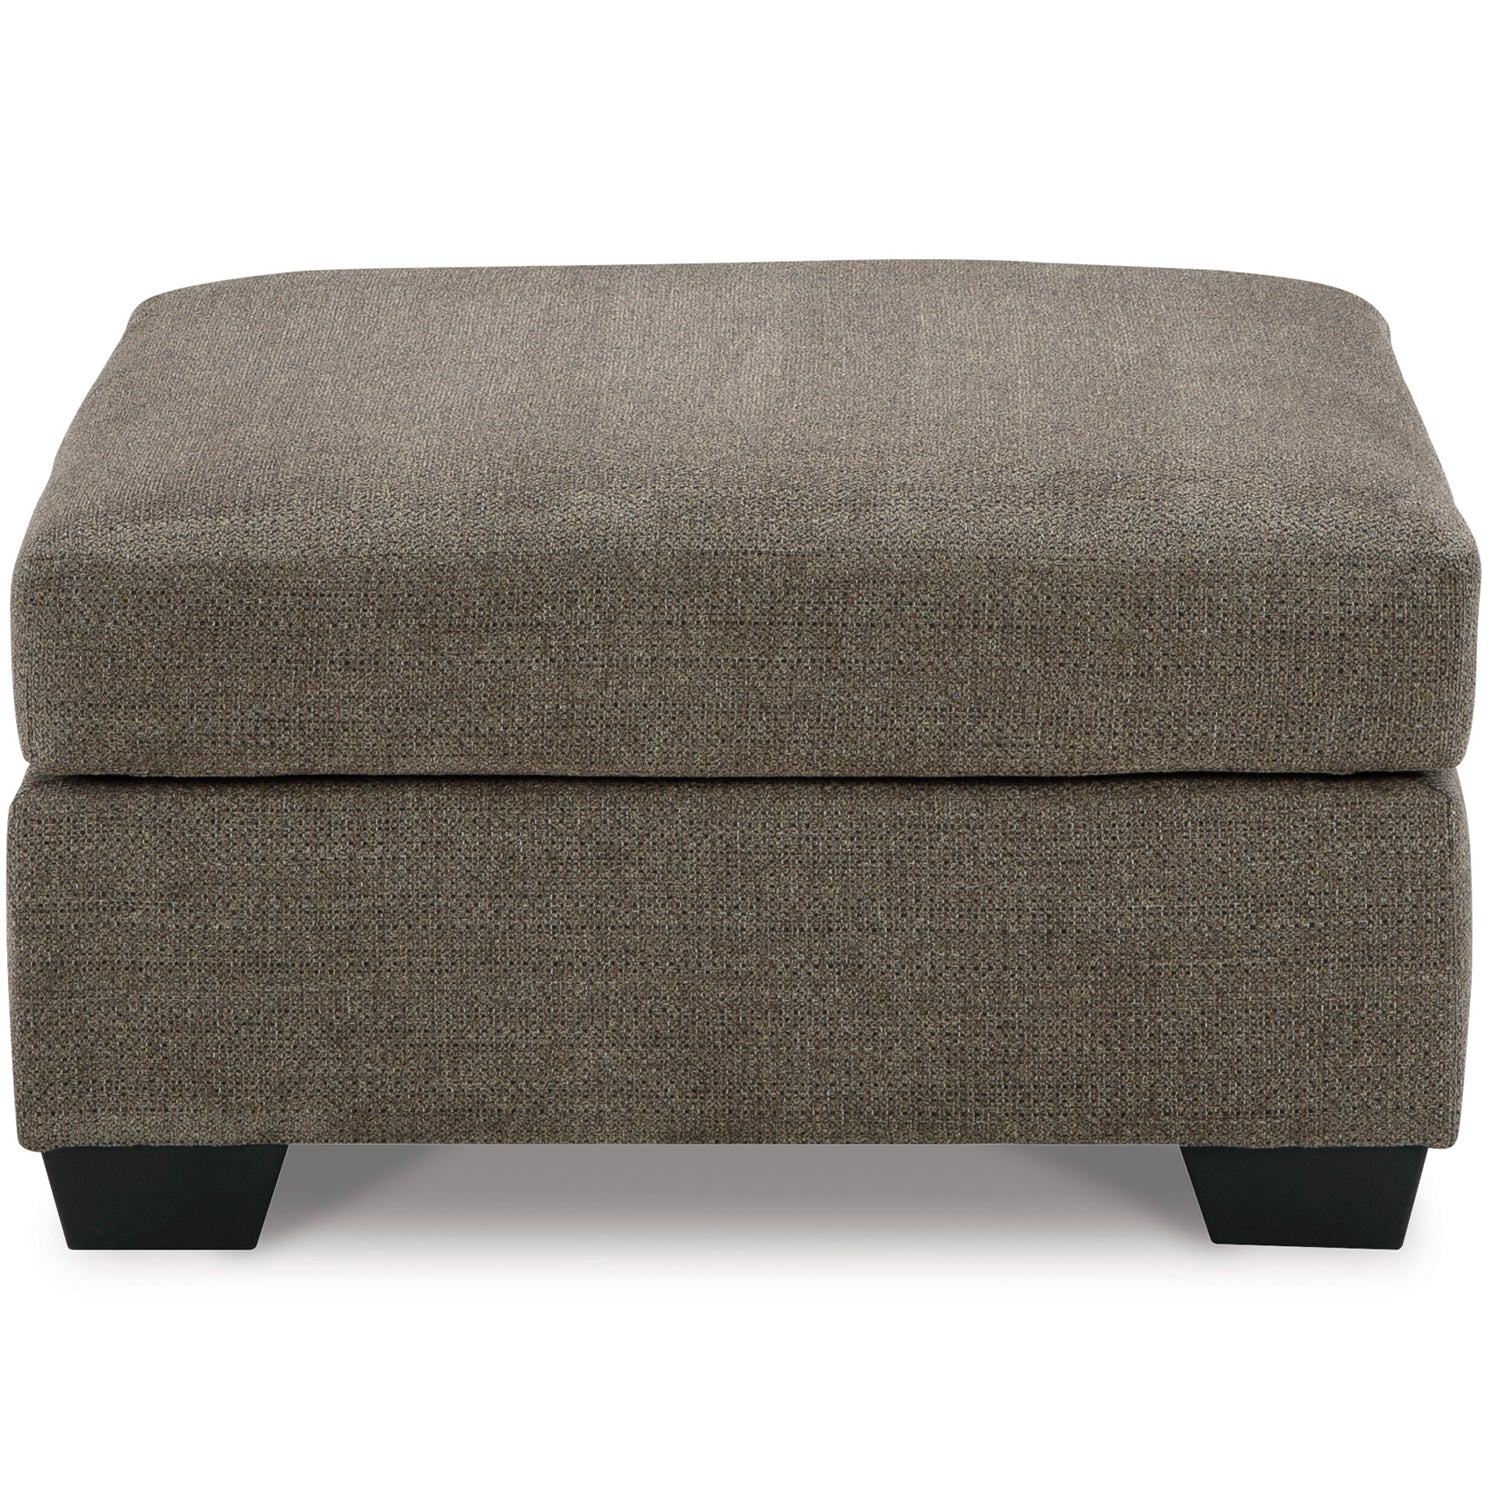 Rich chocolate Mahoney Oversized Accent Ottoman, combines sophisticated style with practicality